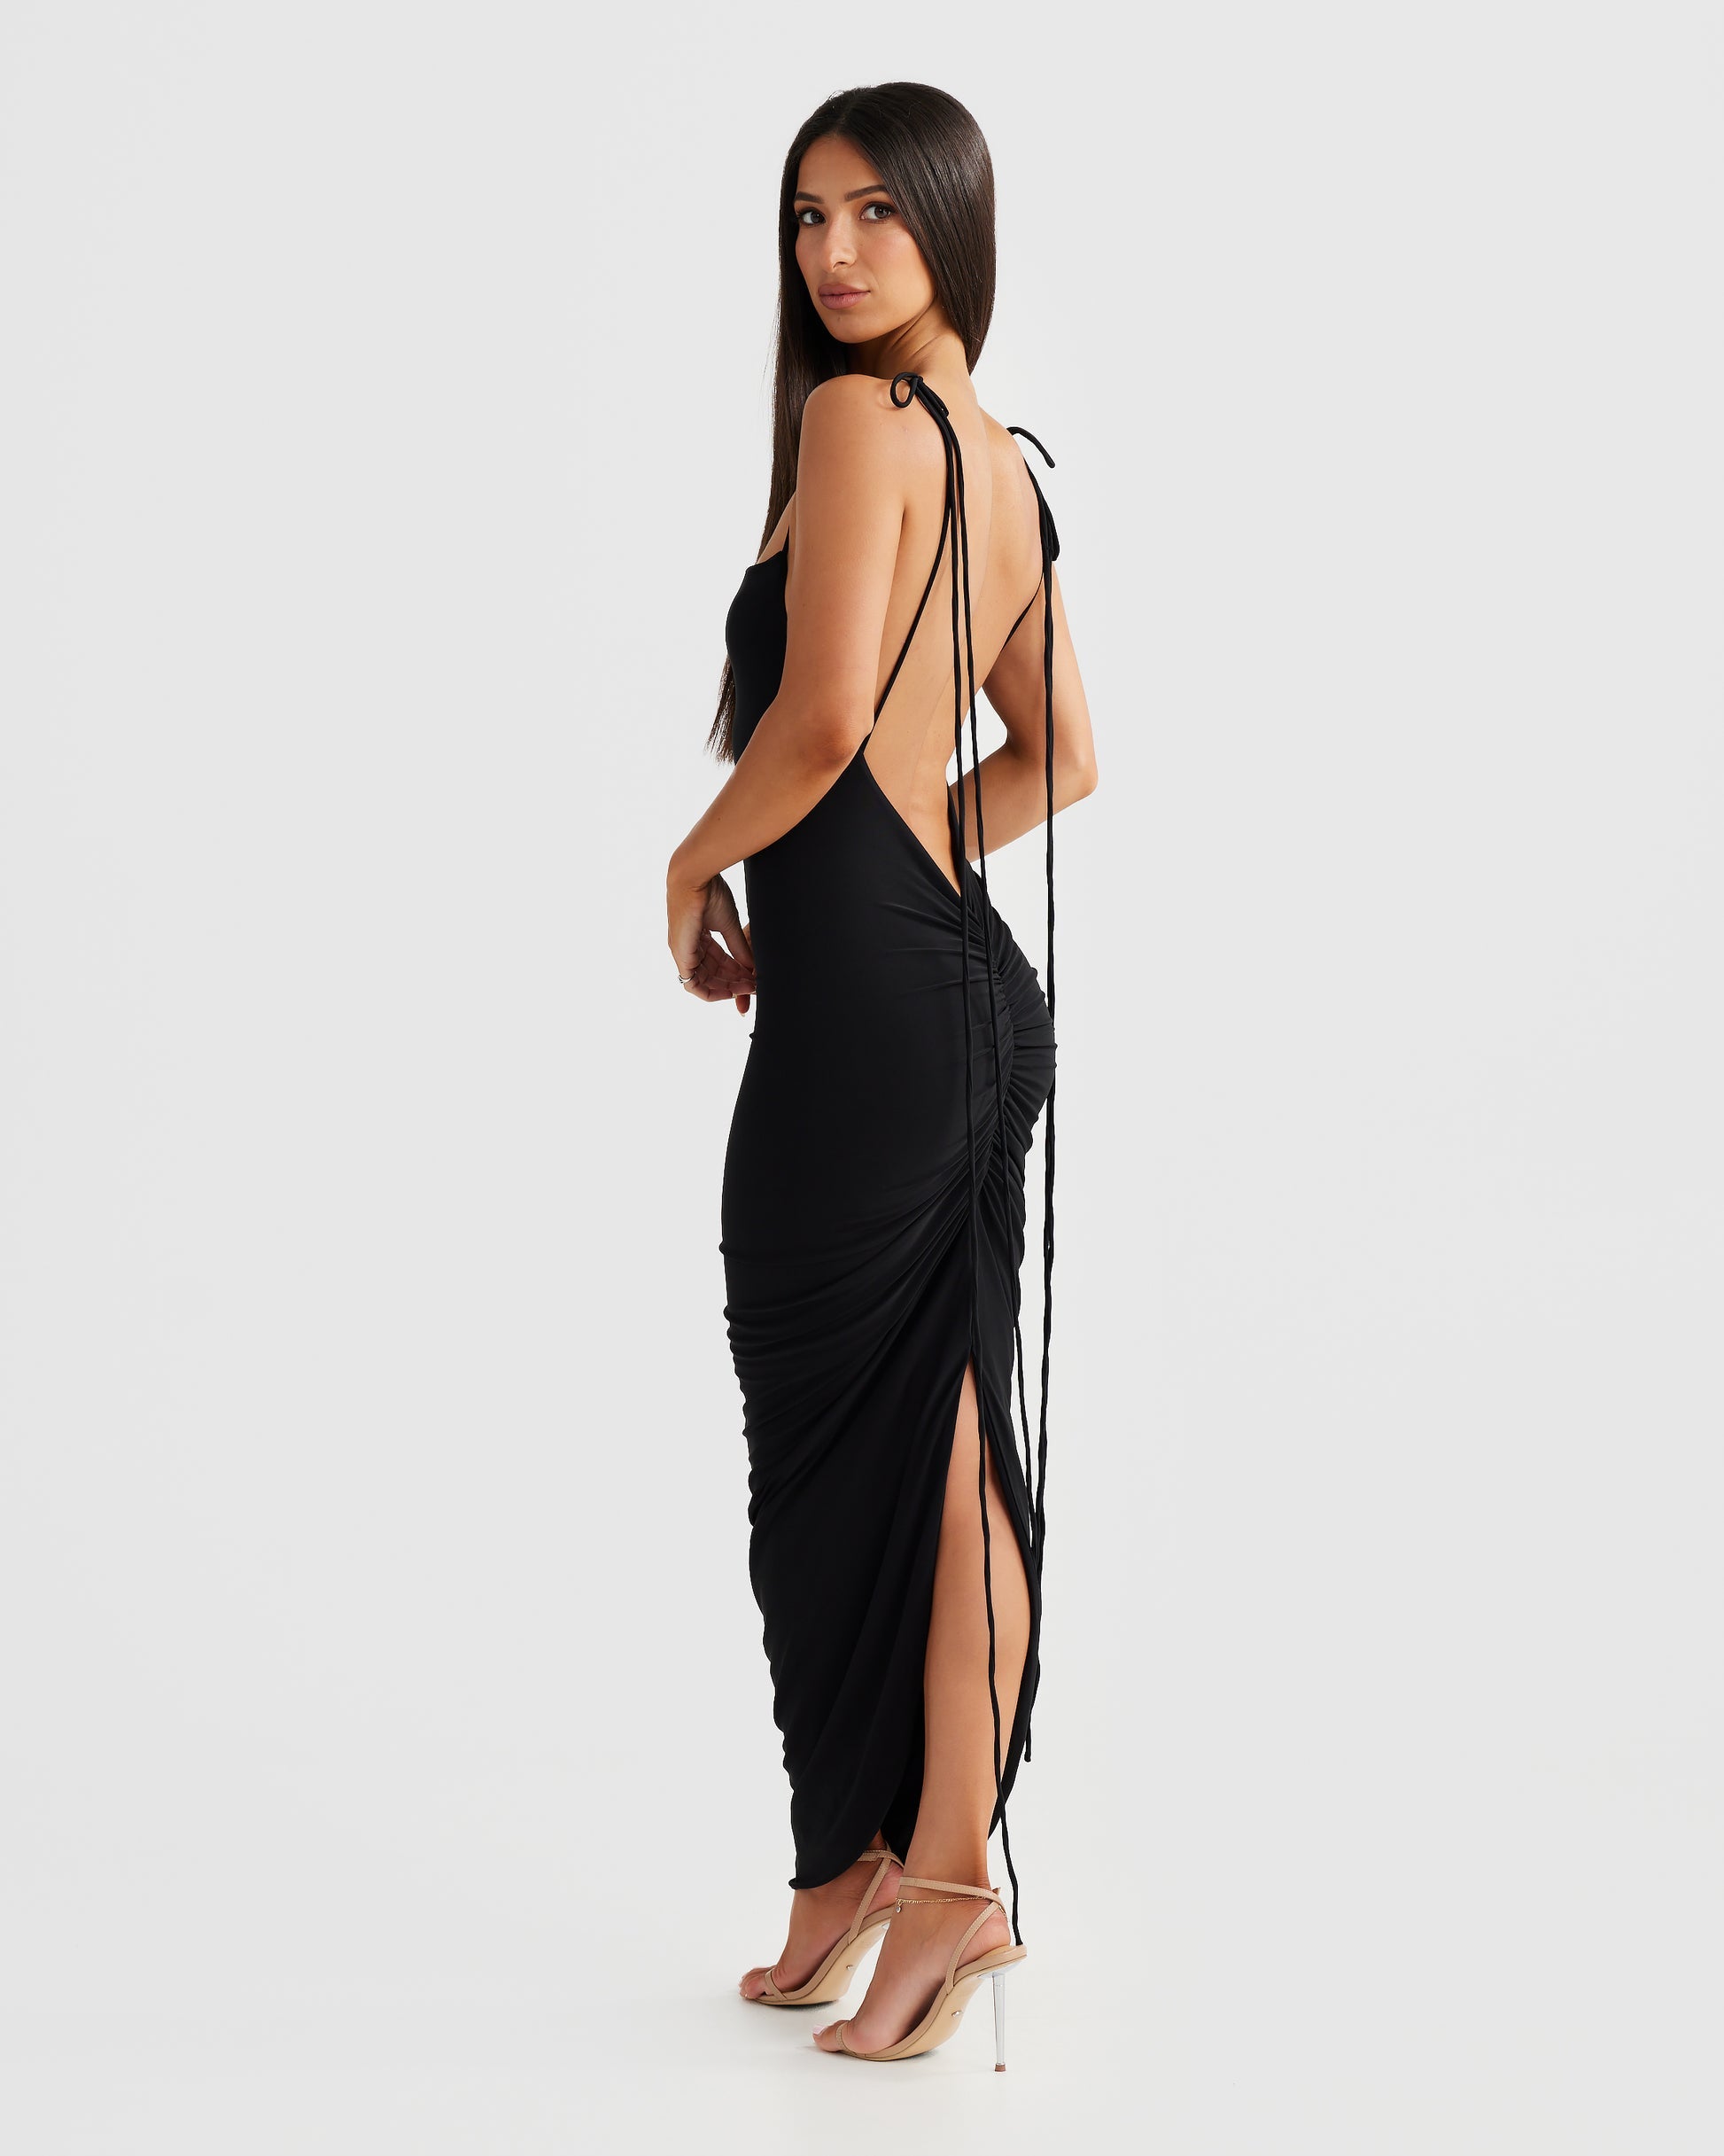 MÉLANI The Label CLEO Black Bum Ruched Backless Dress